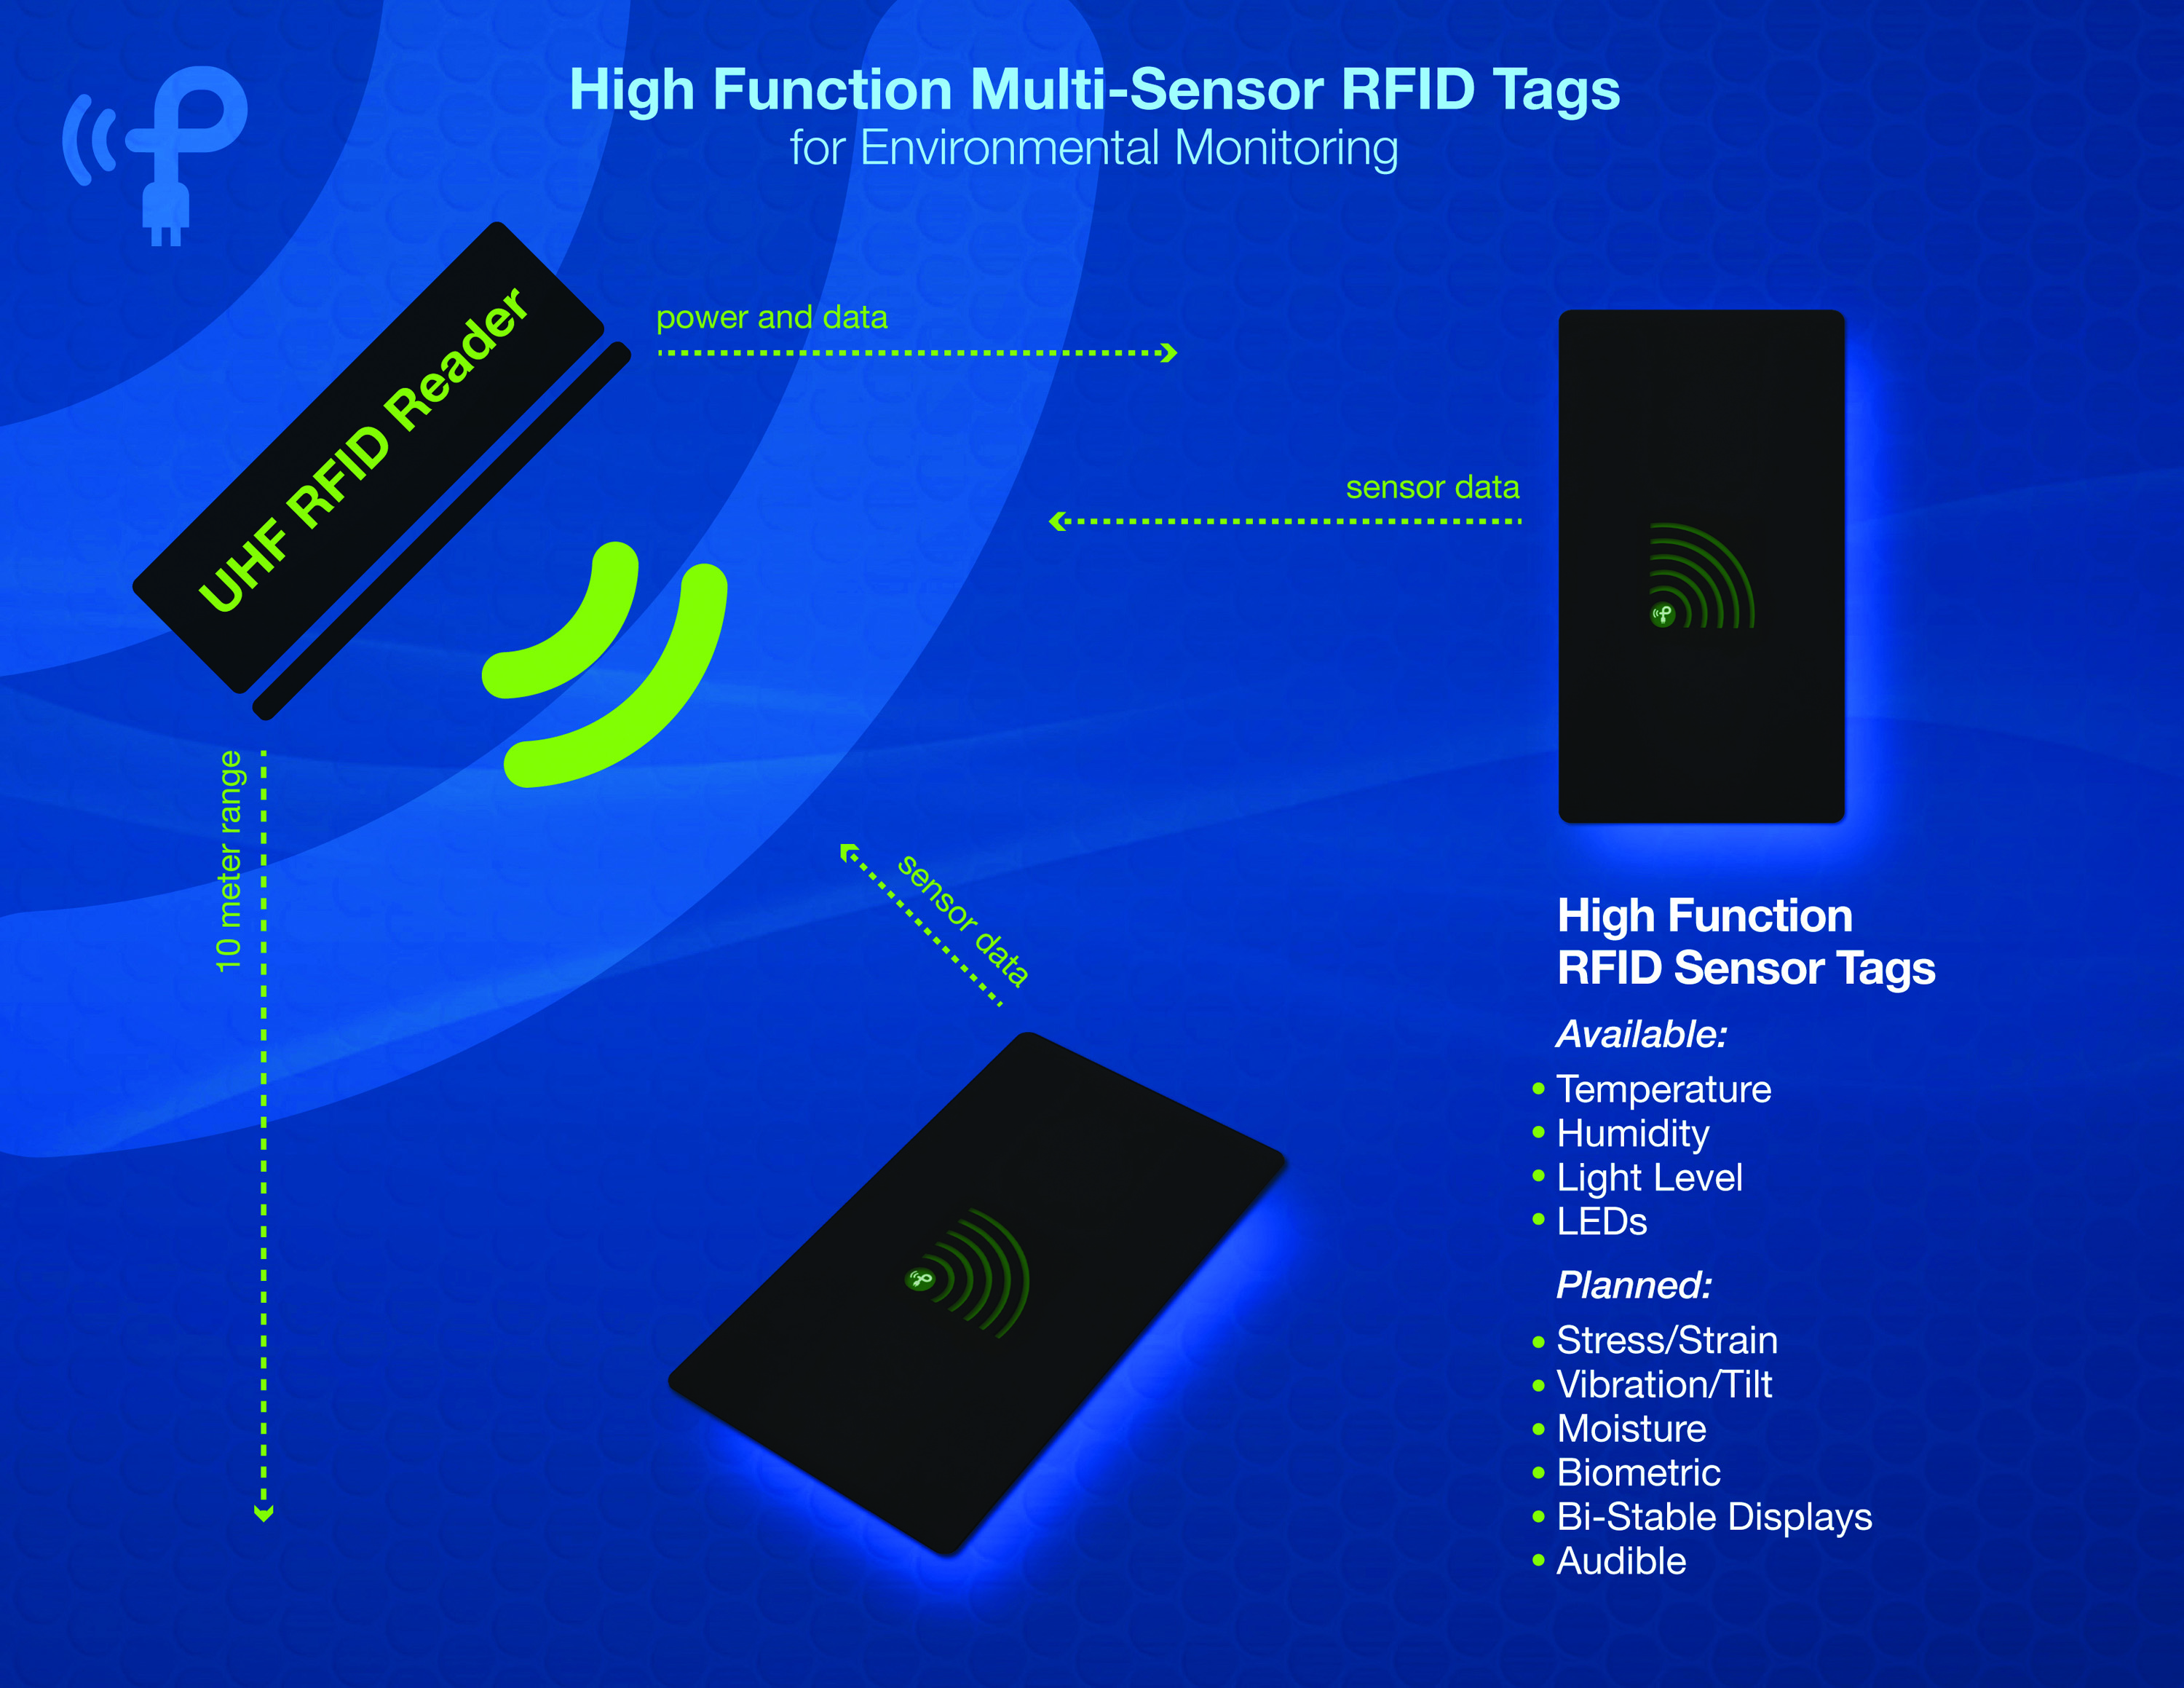 The industry's first RFID Sensor Tags which can include multiple sensors in a single tag, and provide the industry's longest read range of 10 meters, or 32 feet.